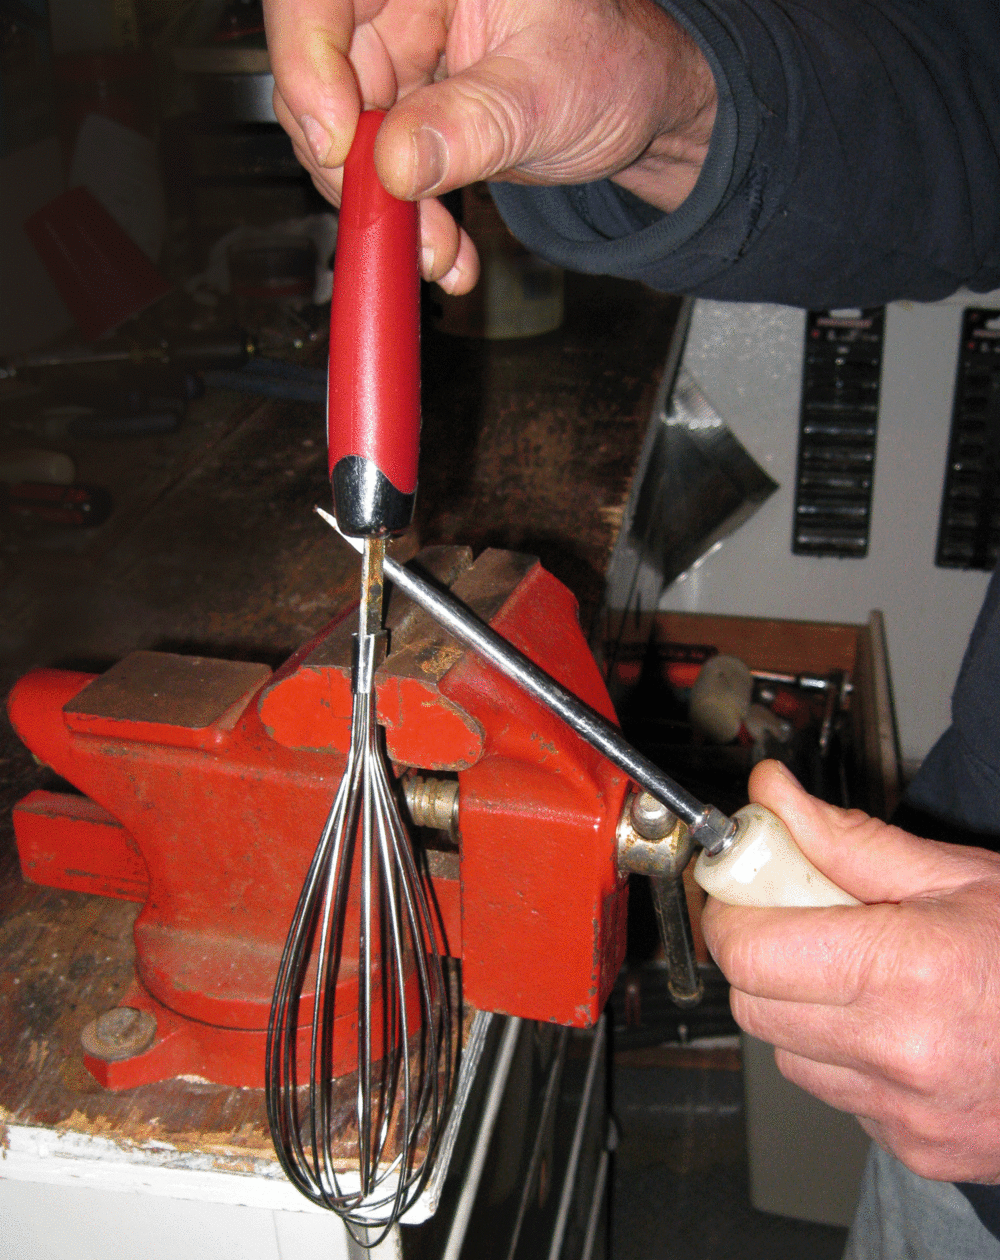 Wire wisk removing handle